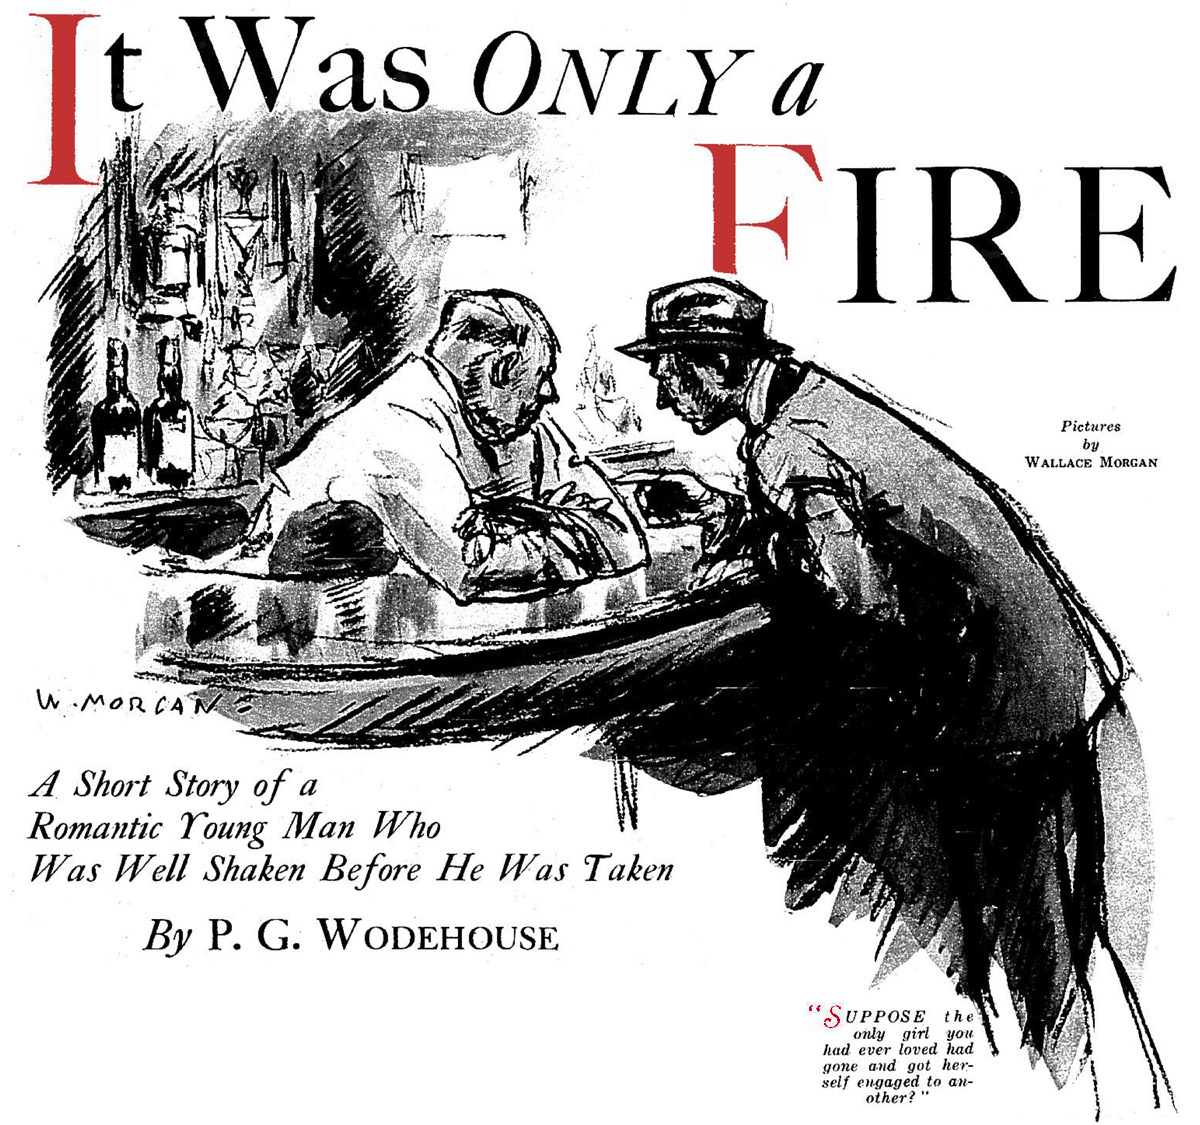 It Was Only a Fire, by P. G. Wodehouse